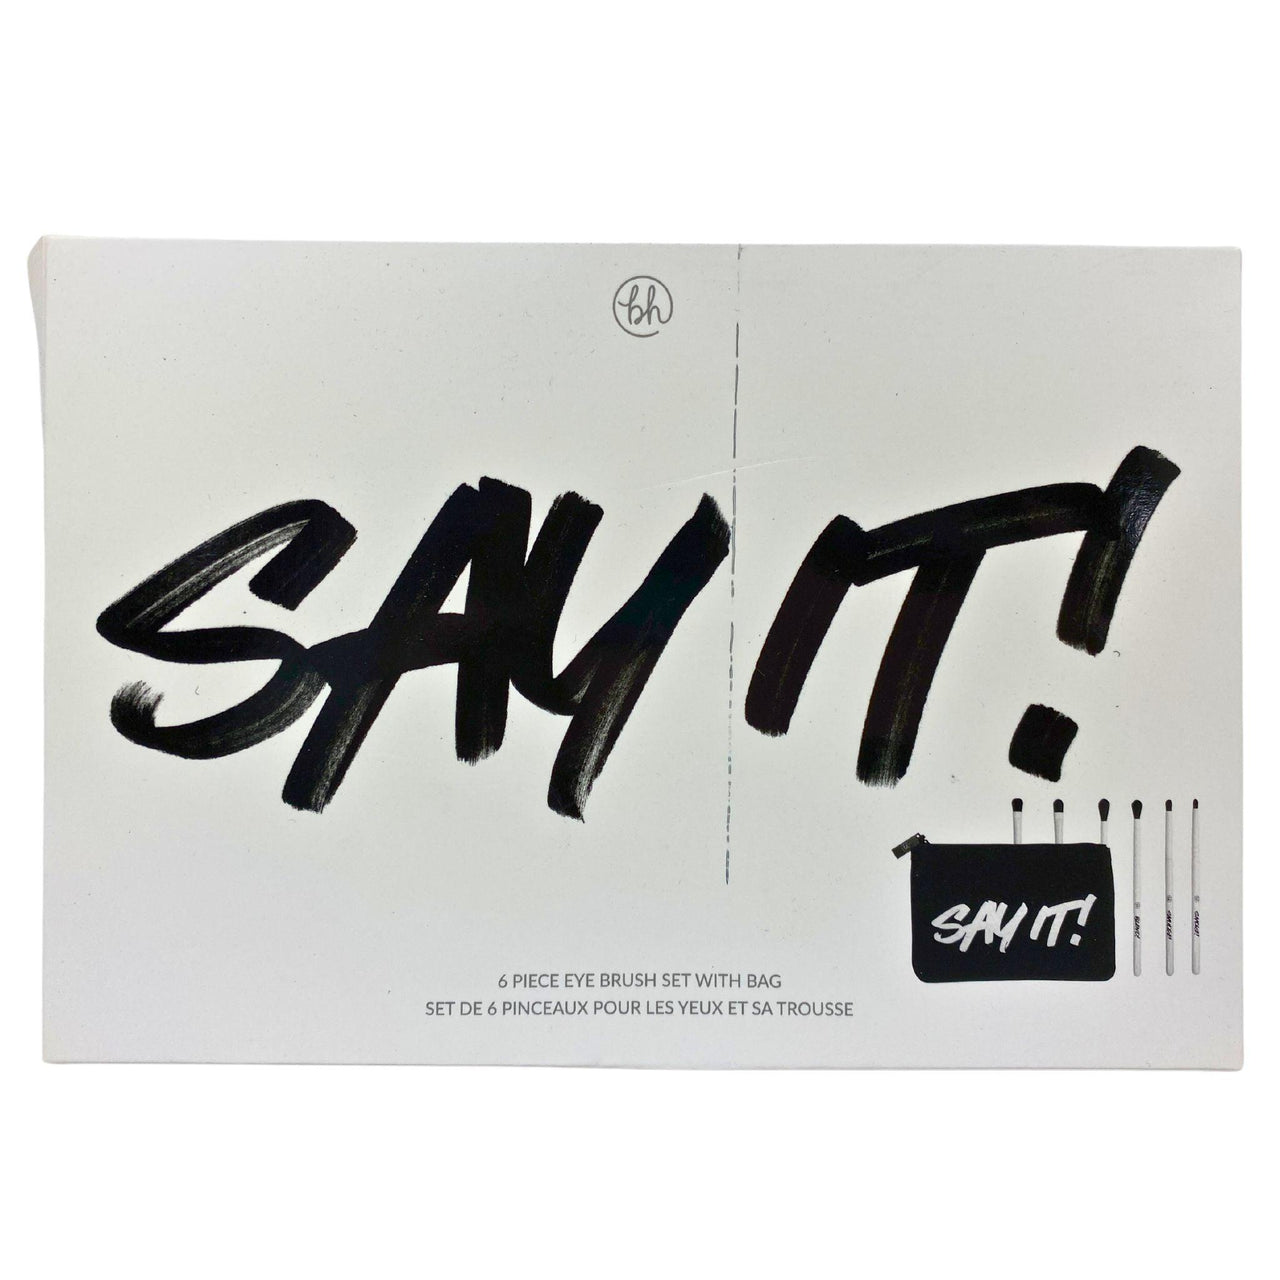 BH Cosmetics "Say It" 6 pieces eye brush Set With Bag (32 Pcs Lot) - Discount Wholesalers Inc